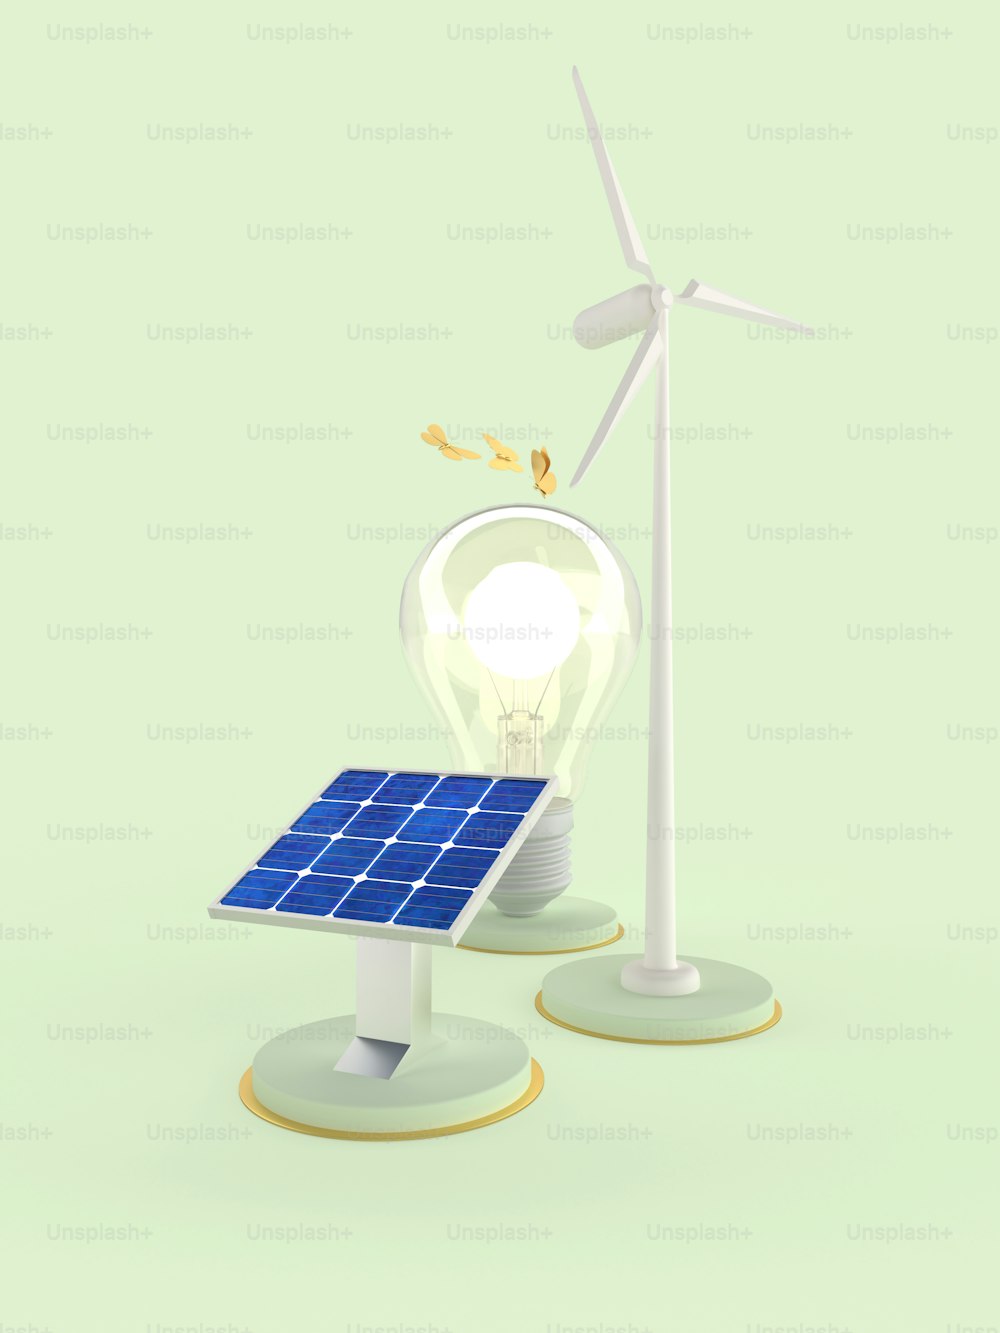 a solar panel and a wind turbine on a green background